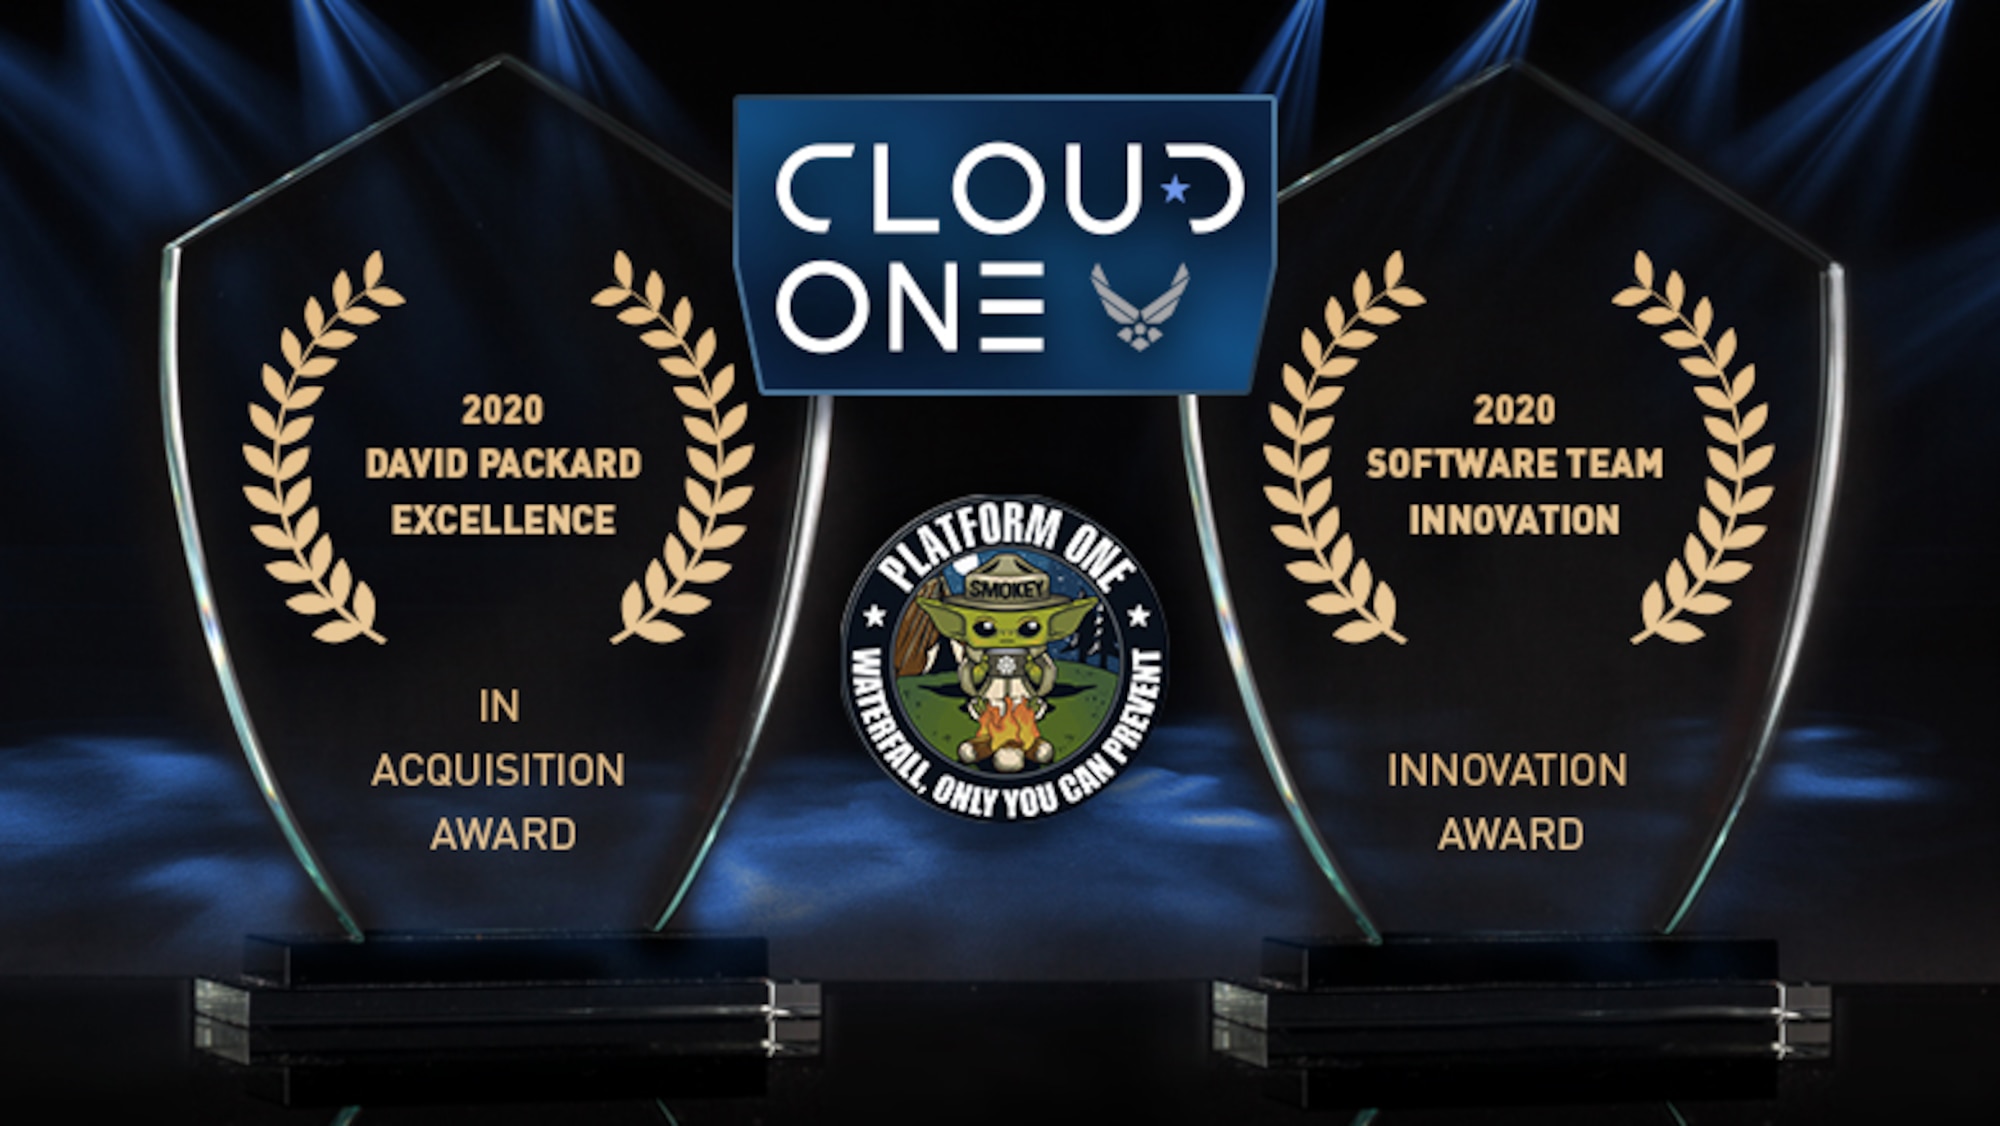 Multiple Hanscom-based teams and individuals were recognized by the Department of Defense with 2020 Defense Acquisition Workforce Awards for excellence in contracting, acquisitions, and software development. For C3I&N, the Cloud One and Platform One Teams won both the Software Innovation Team Award and the David Packard Excellence in Acquisition Award; for Digital, Melissa Kennedy won the Individual Achievement Award for Services Acquisition. (Graphic by the Department of Defense)